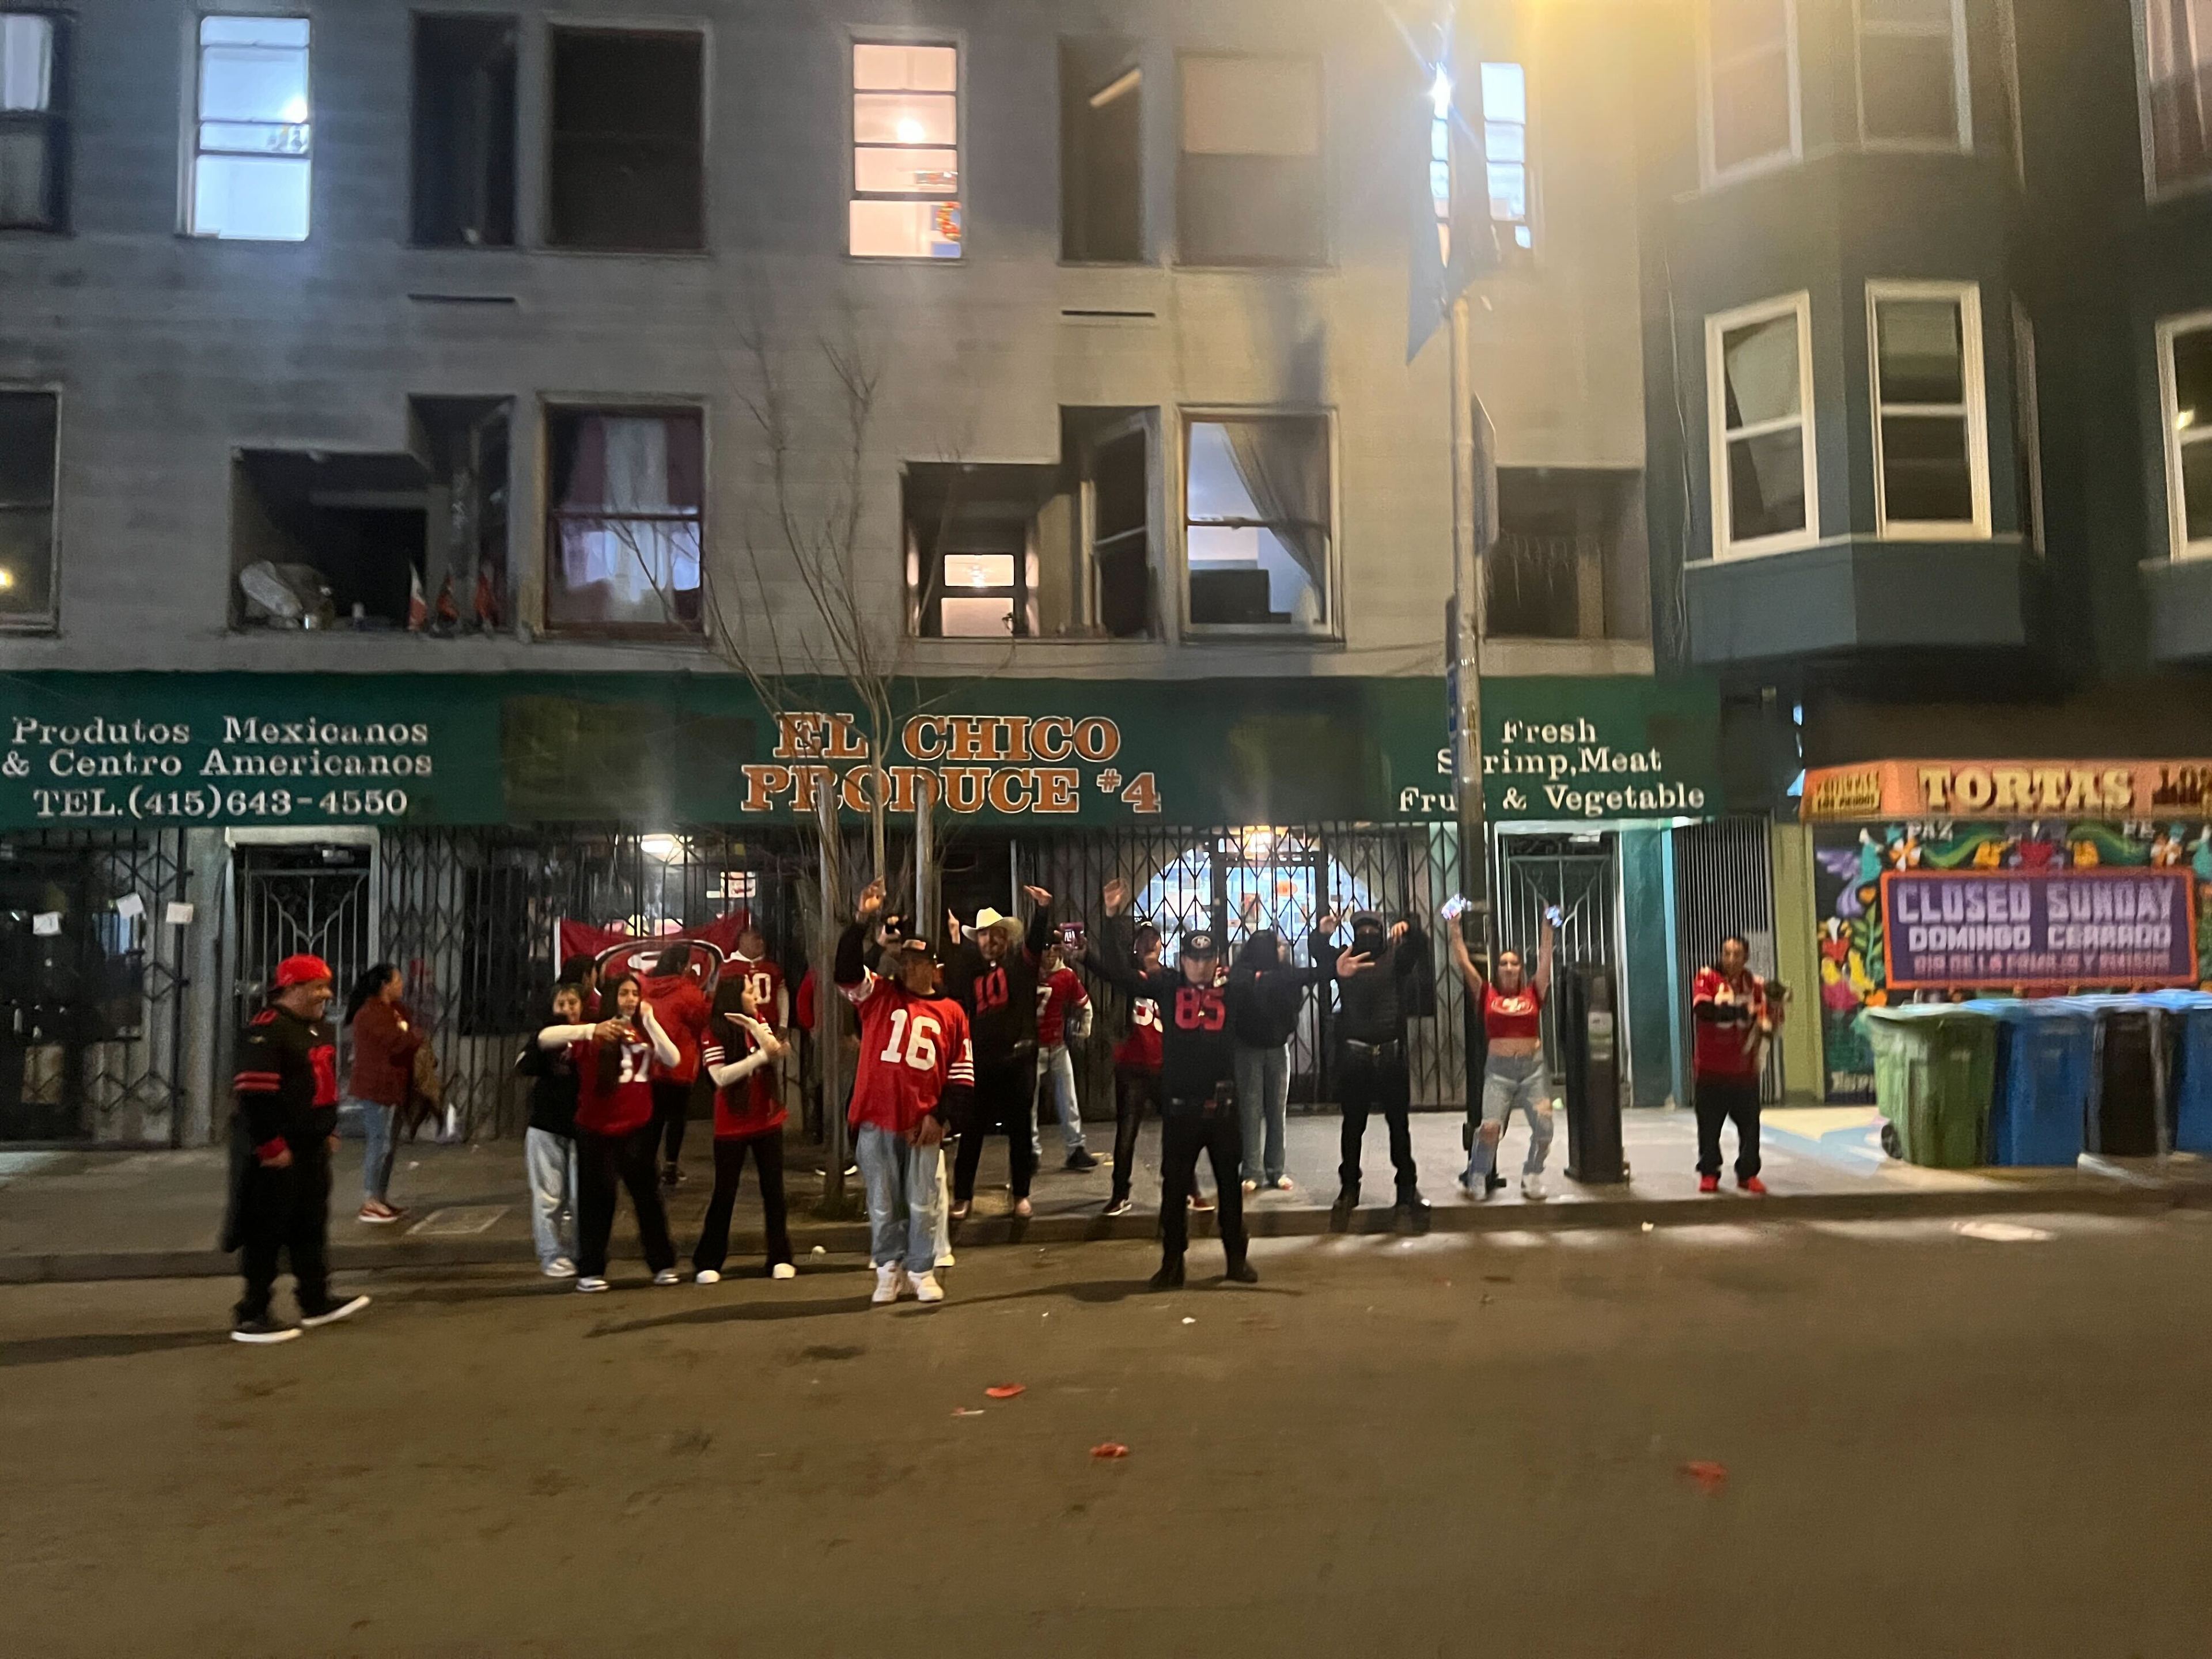 People in red jerseys are gathered outside shops on a city street at dusk. Signs indicate Latin American products.